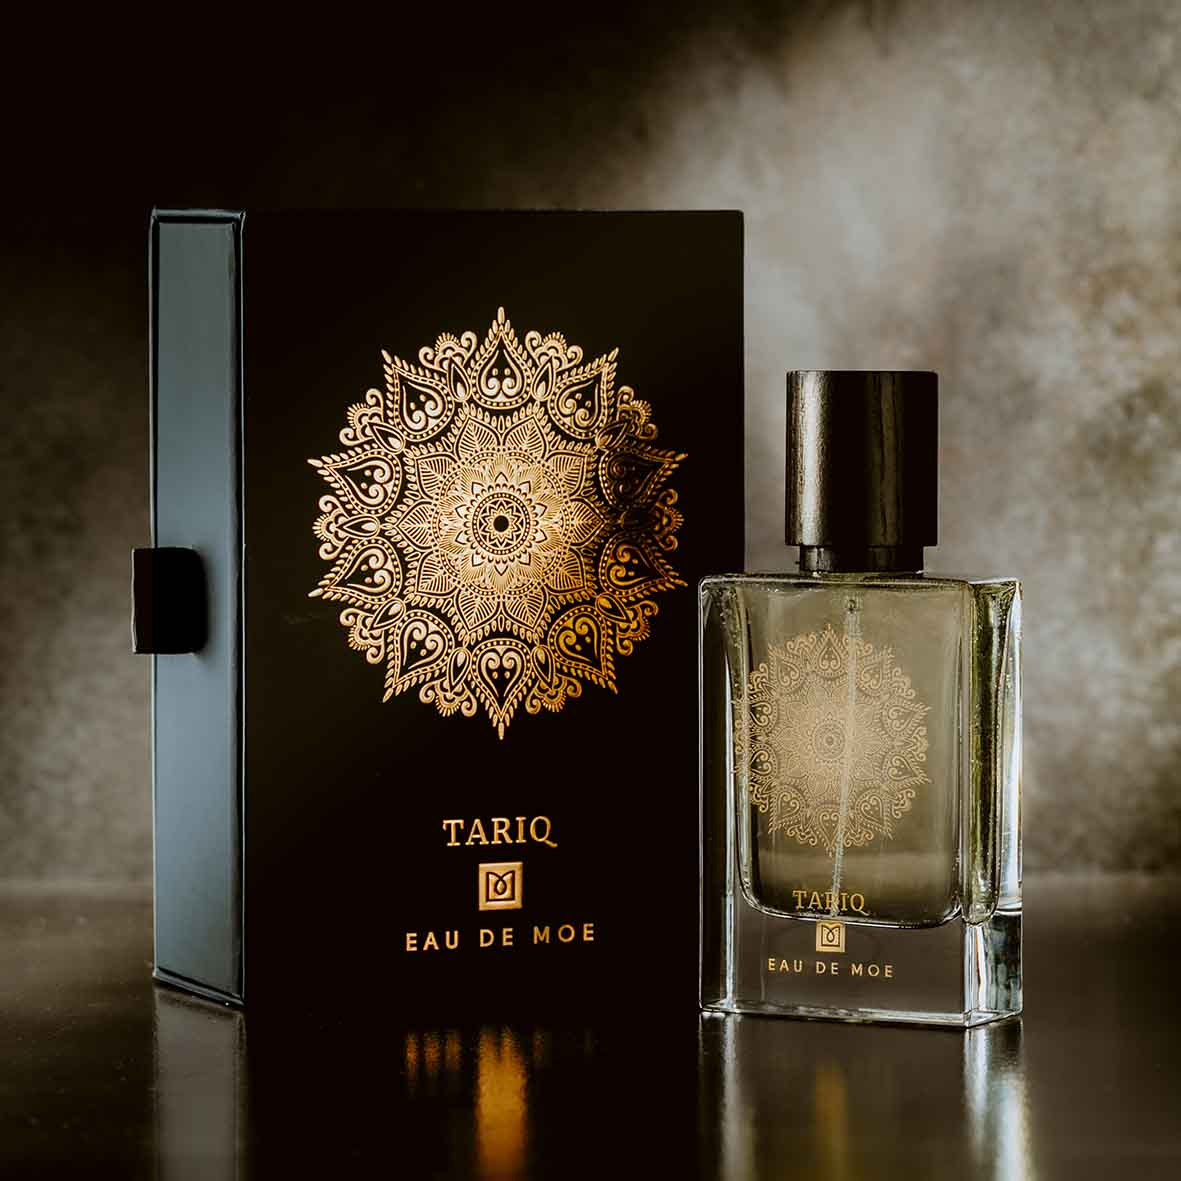 Eau De Moe was created to help share the interpretations of a fusion: "scent and art". Inspirations come from a life filled with wandering travels, different adventures and sparkling discoveries.Shop at fragrapedia.com